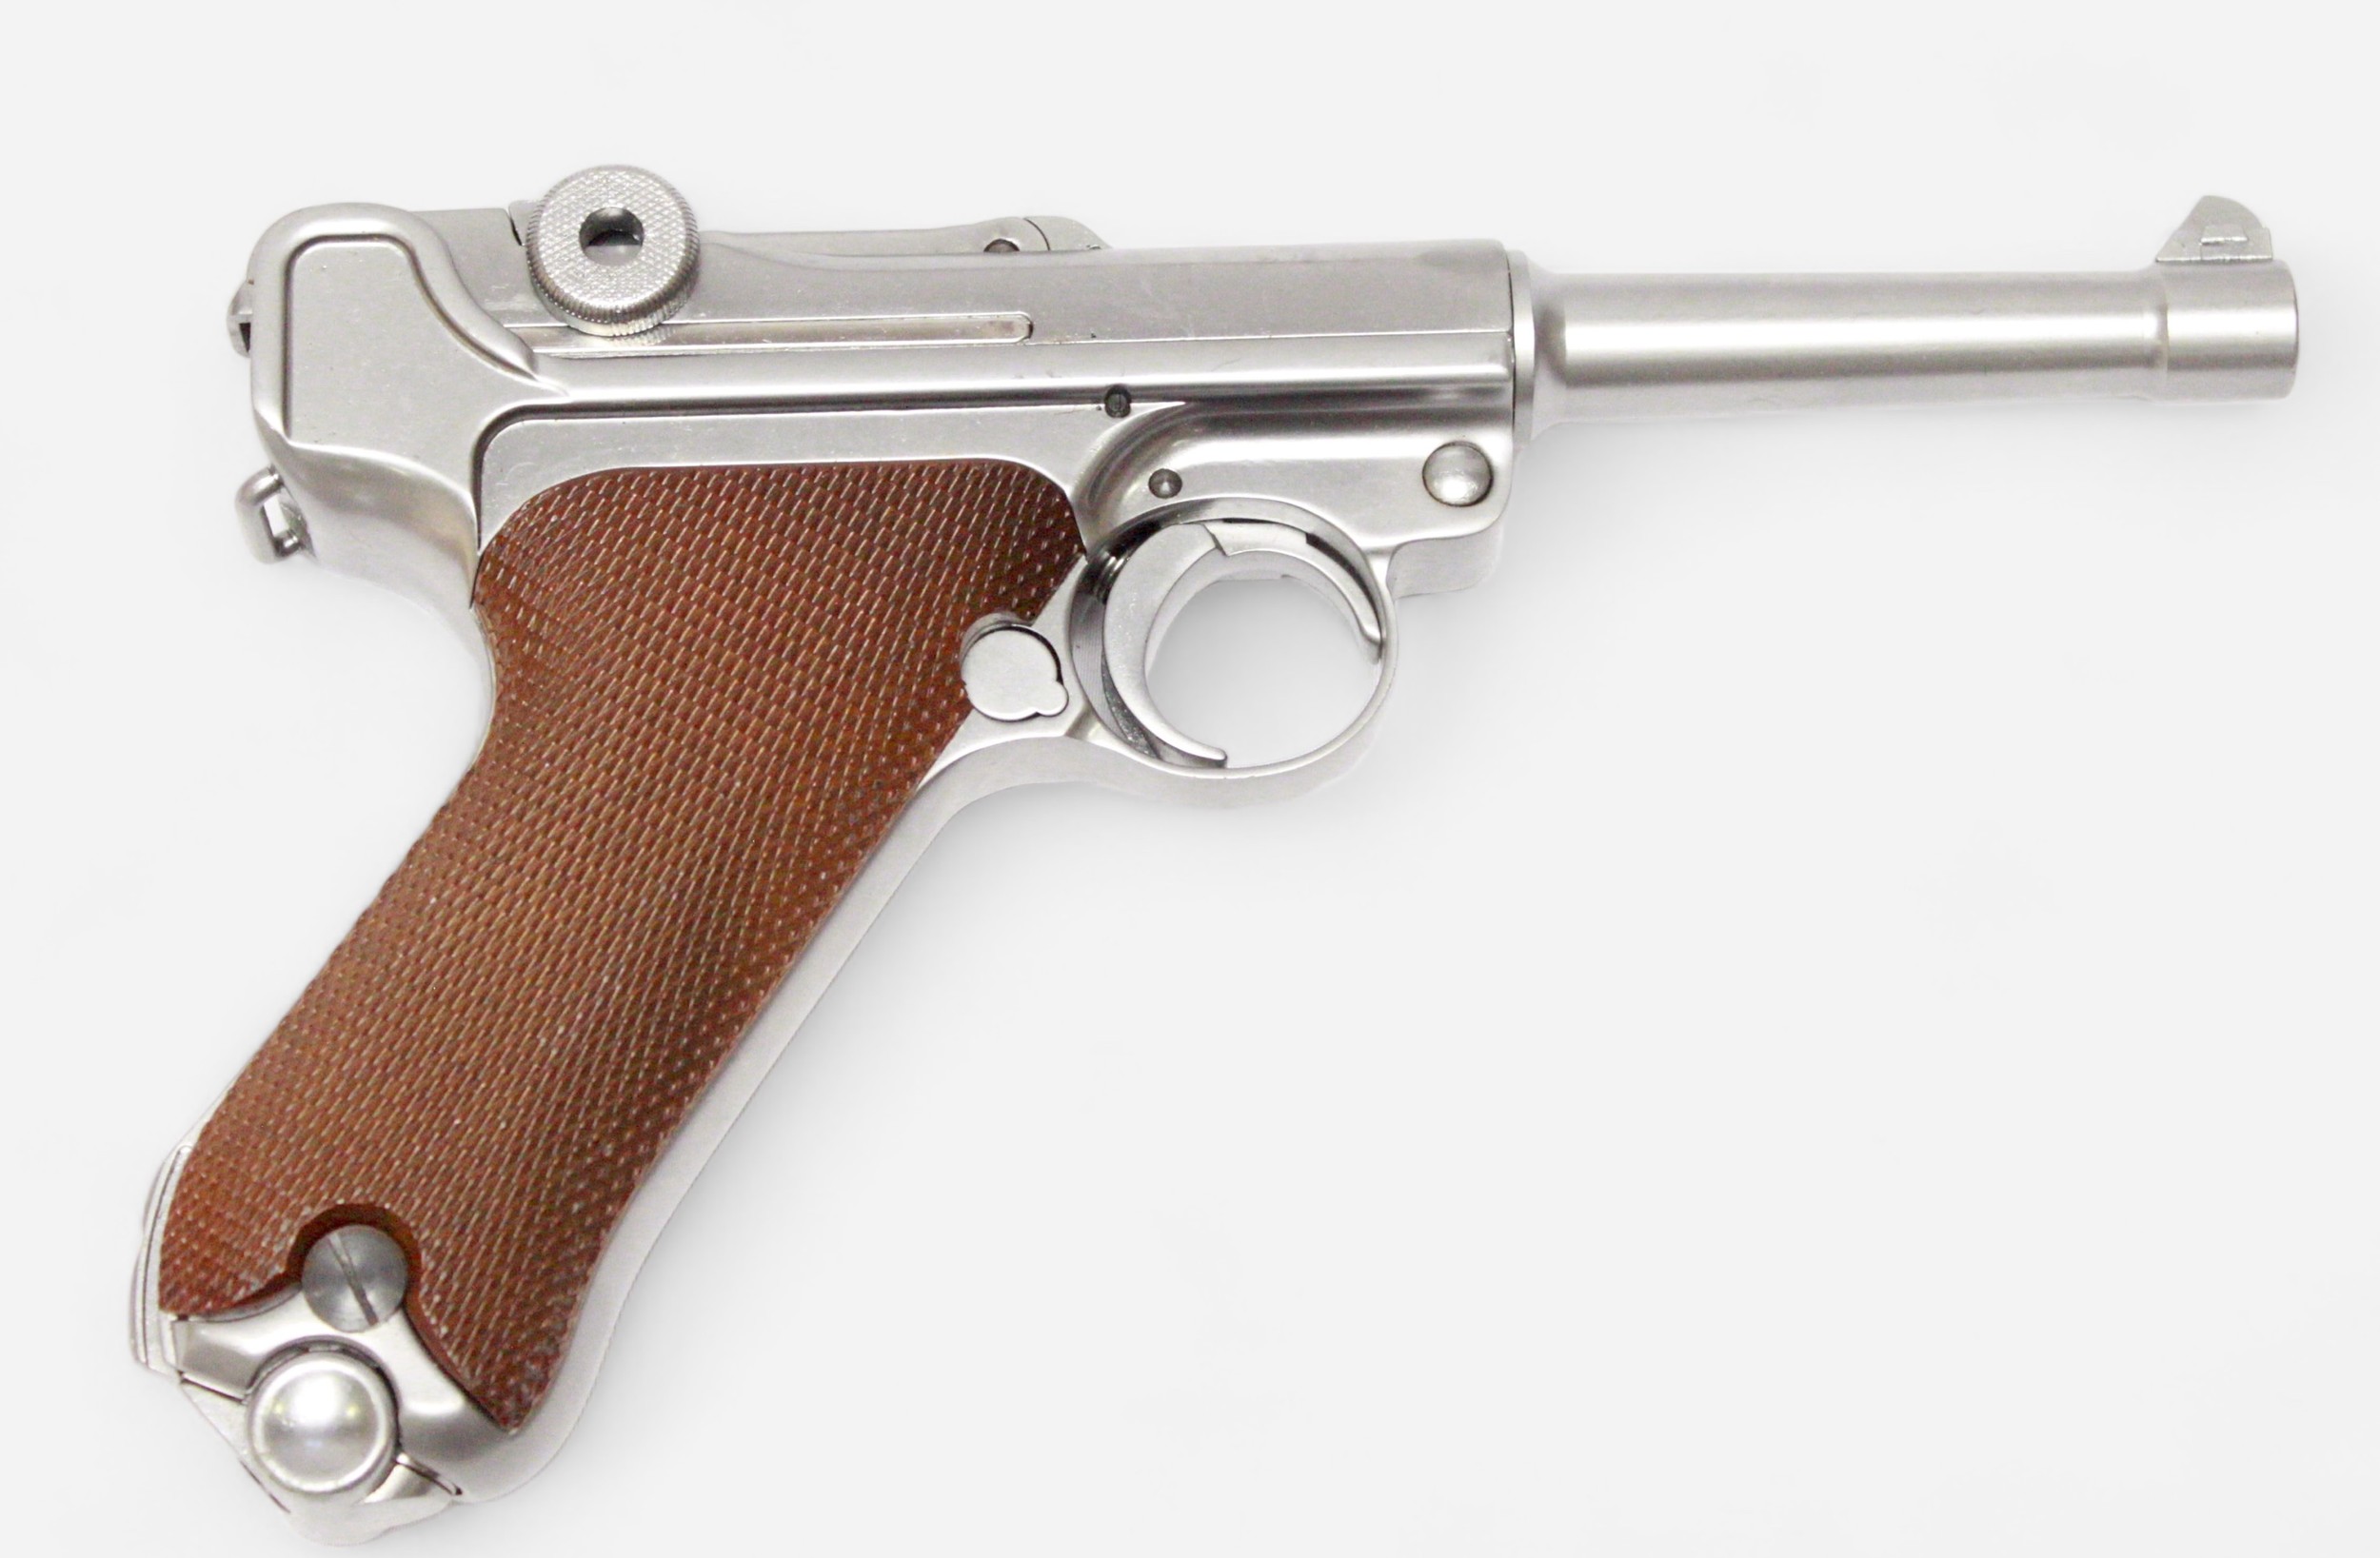 A Gesichert CO2 air pistol modelled as a Luger pistol, stamped '1915', with brown plastic grip